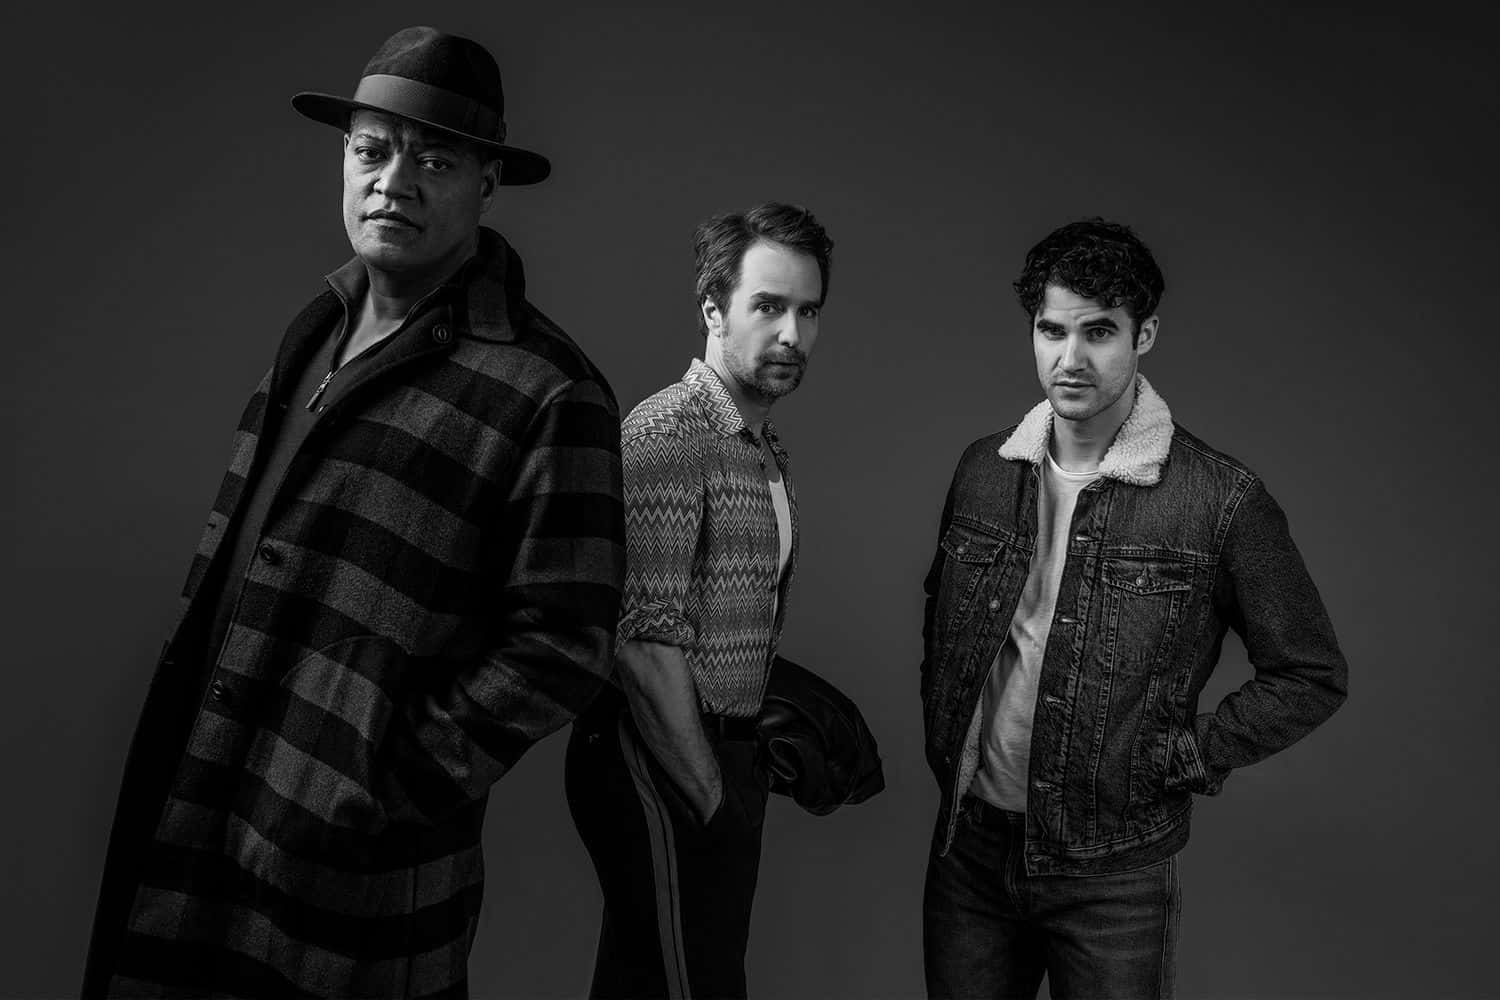 Sam Rockwell, Darren Criss, and Laurence Fishburne in a shared moment caught on camera. Wallpaper